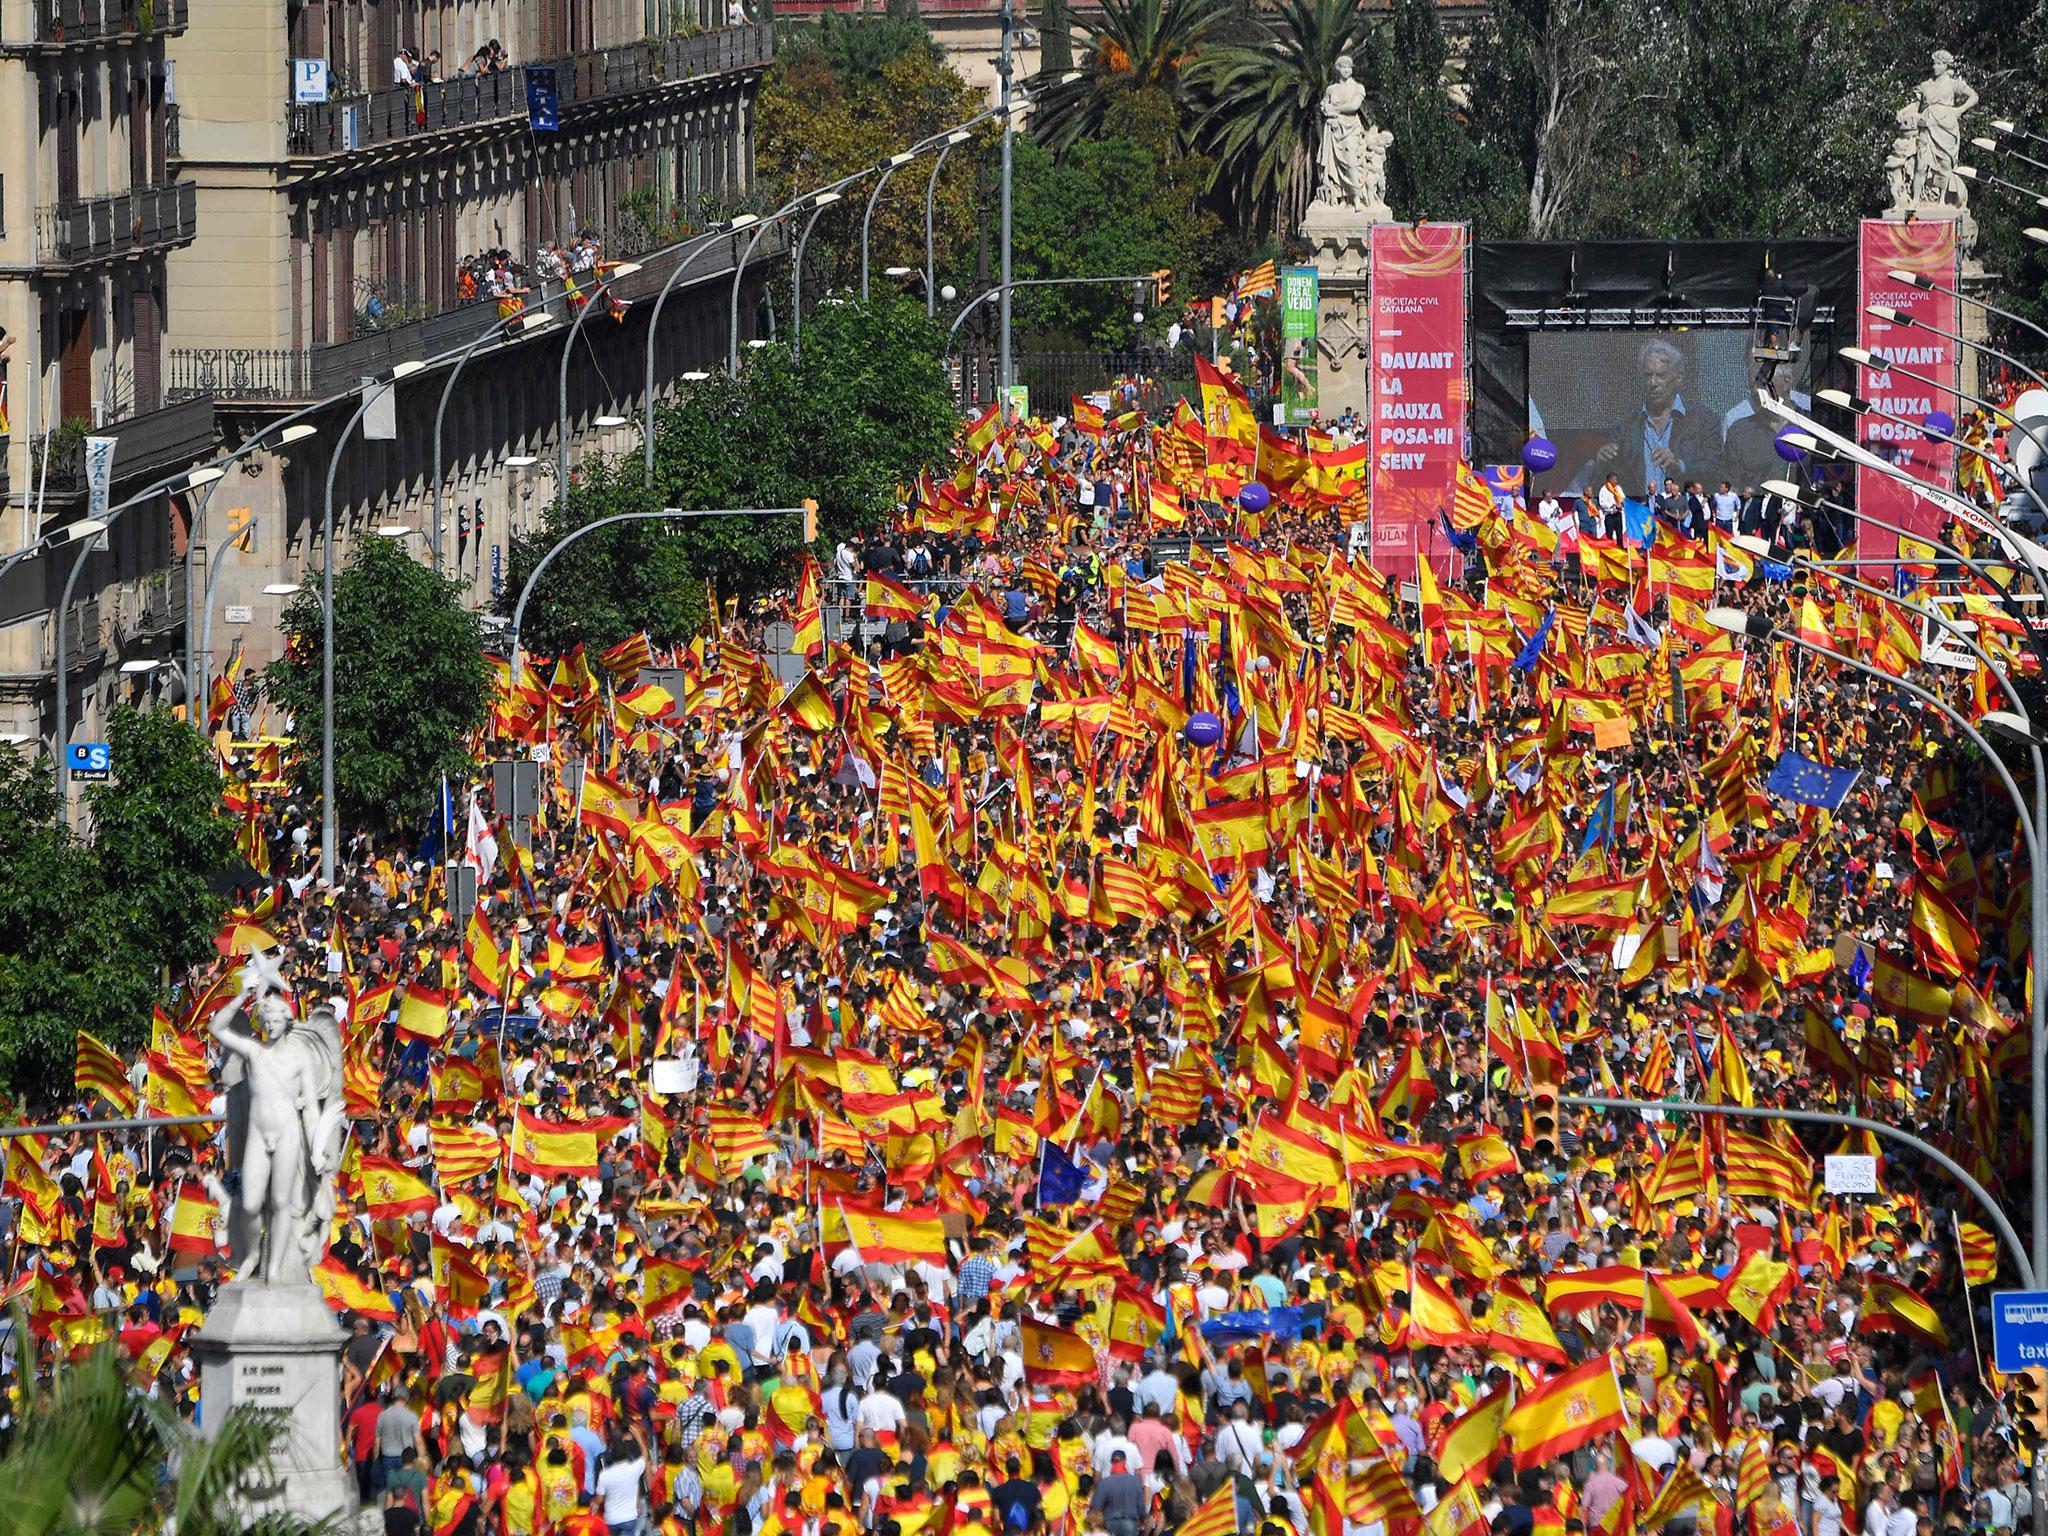 Protesters take part in a demonstration to support the unity of Spain on Sunday in Barcelona